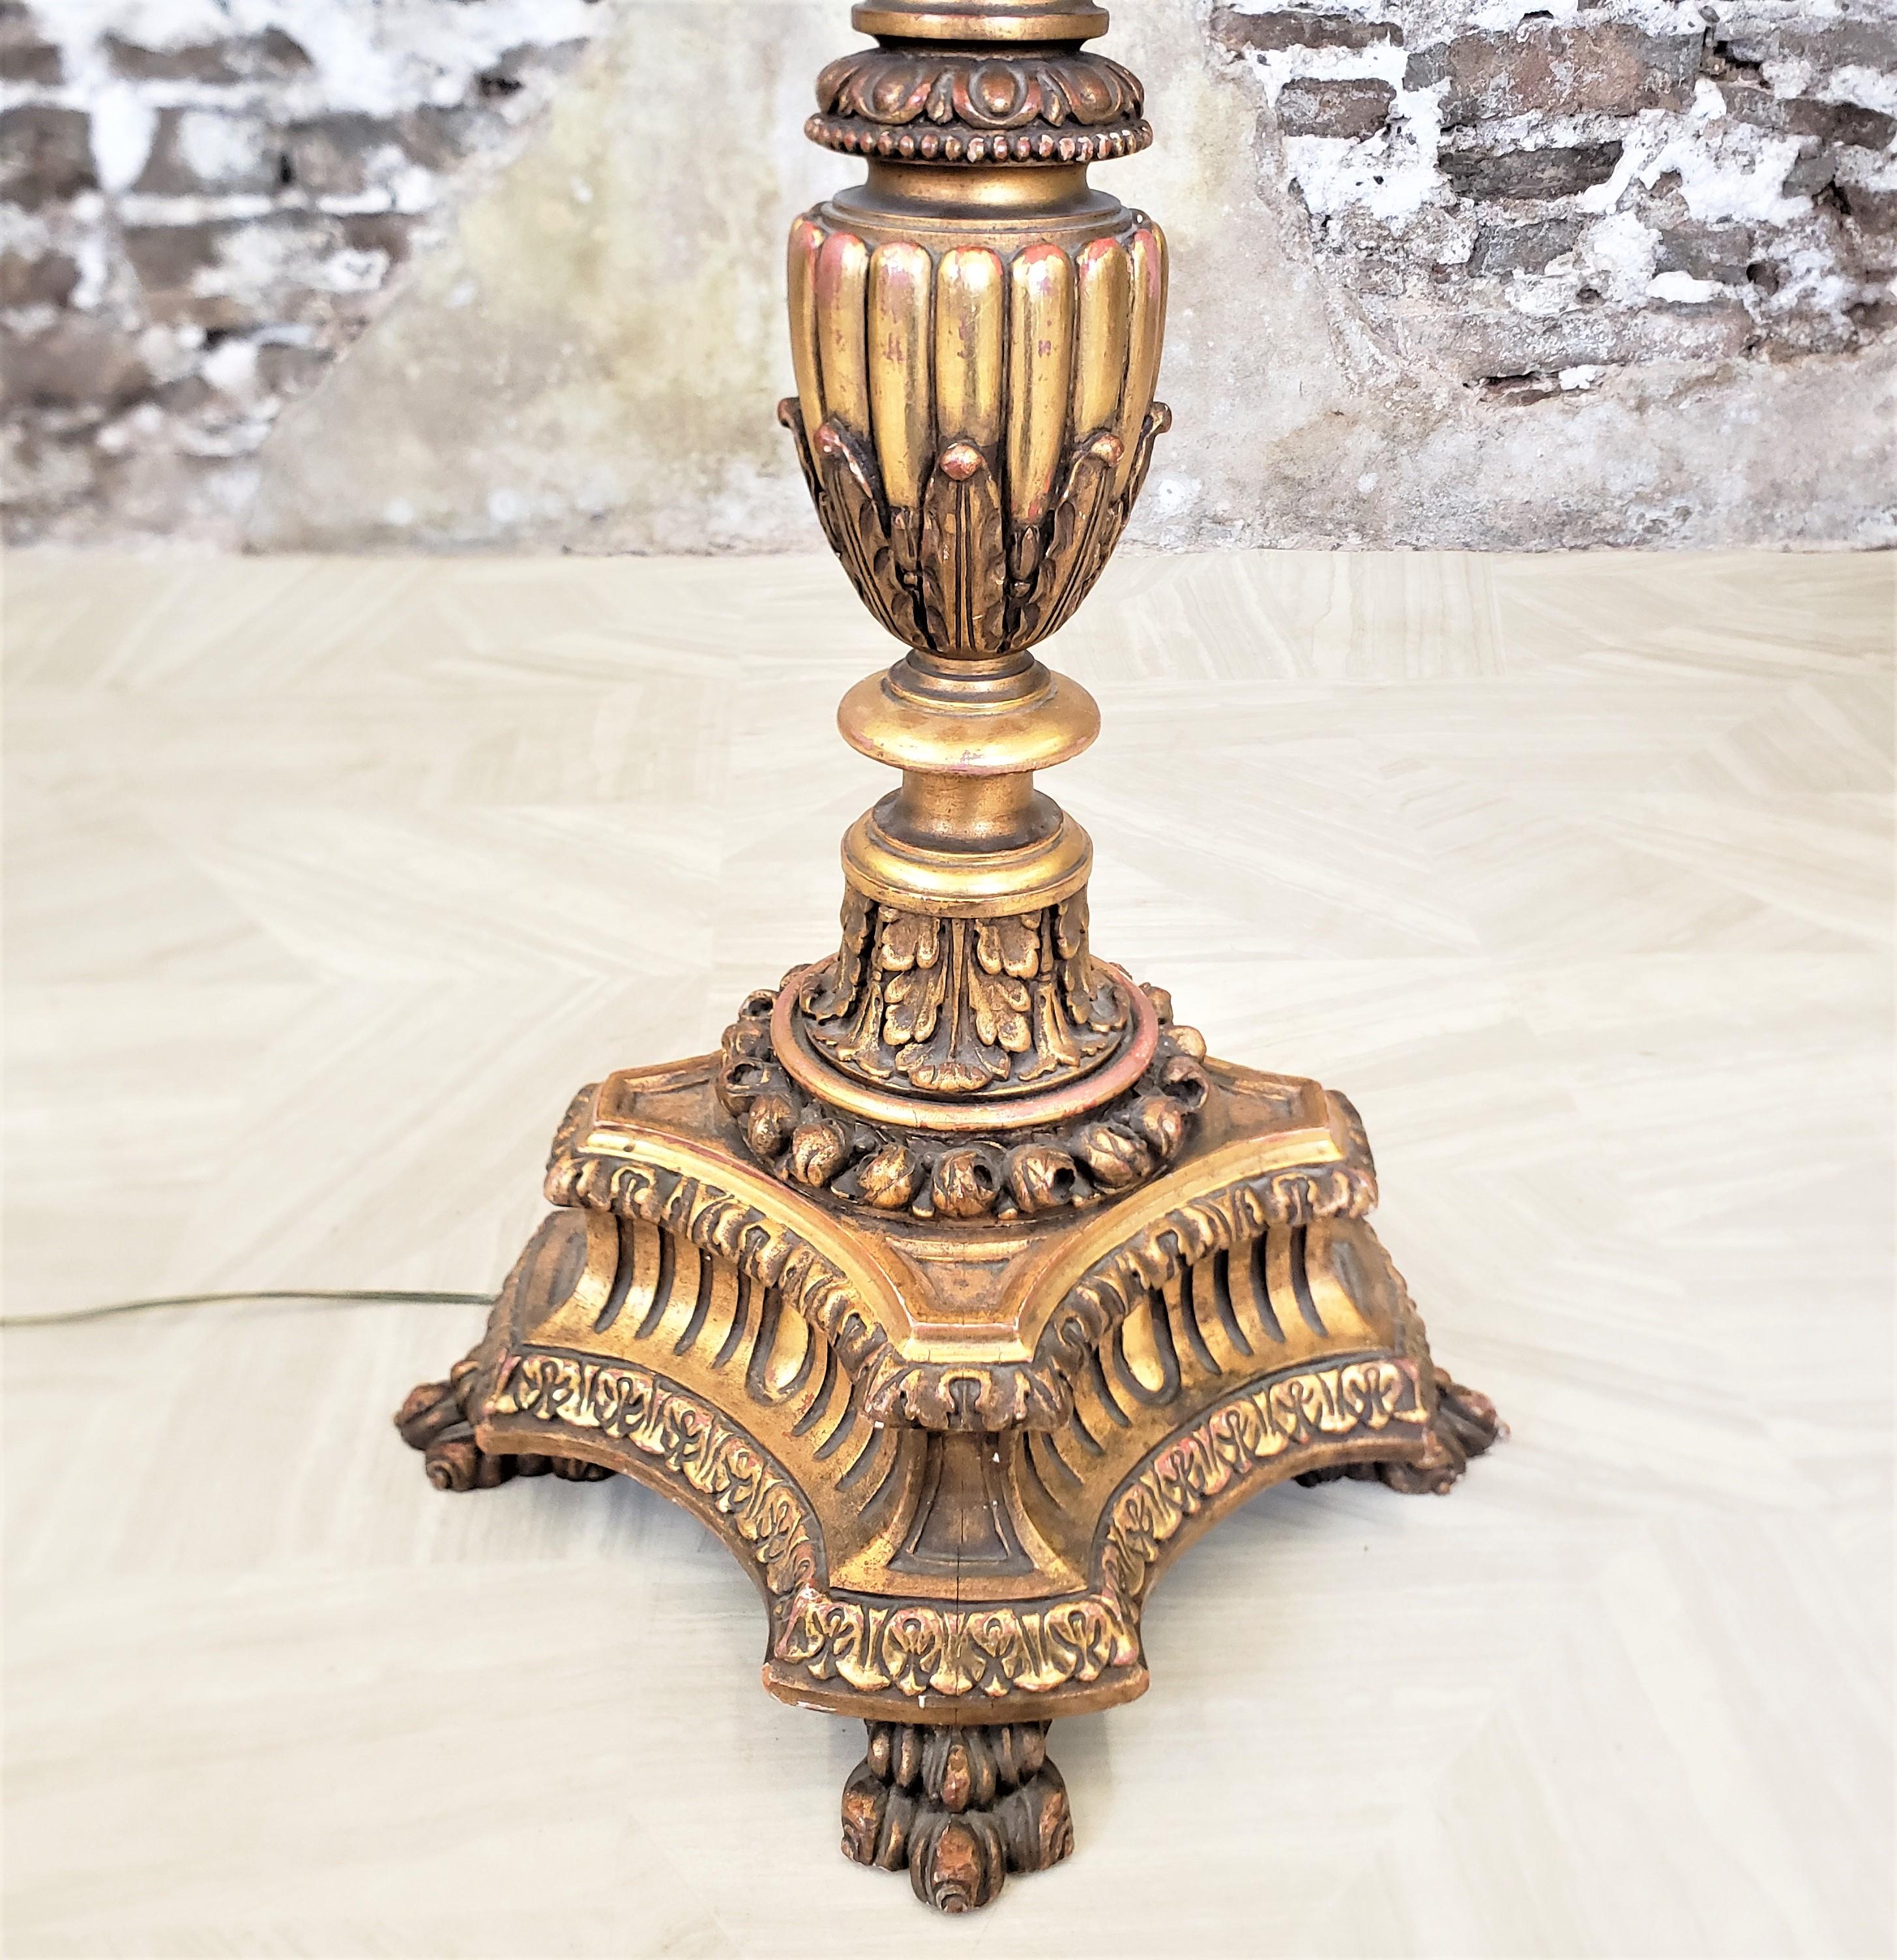 Antique Italian Florentine Hand-Carved & Gilt Finished Floor Lamp & Shade For Sale 6